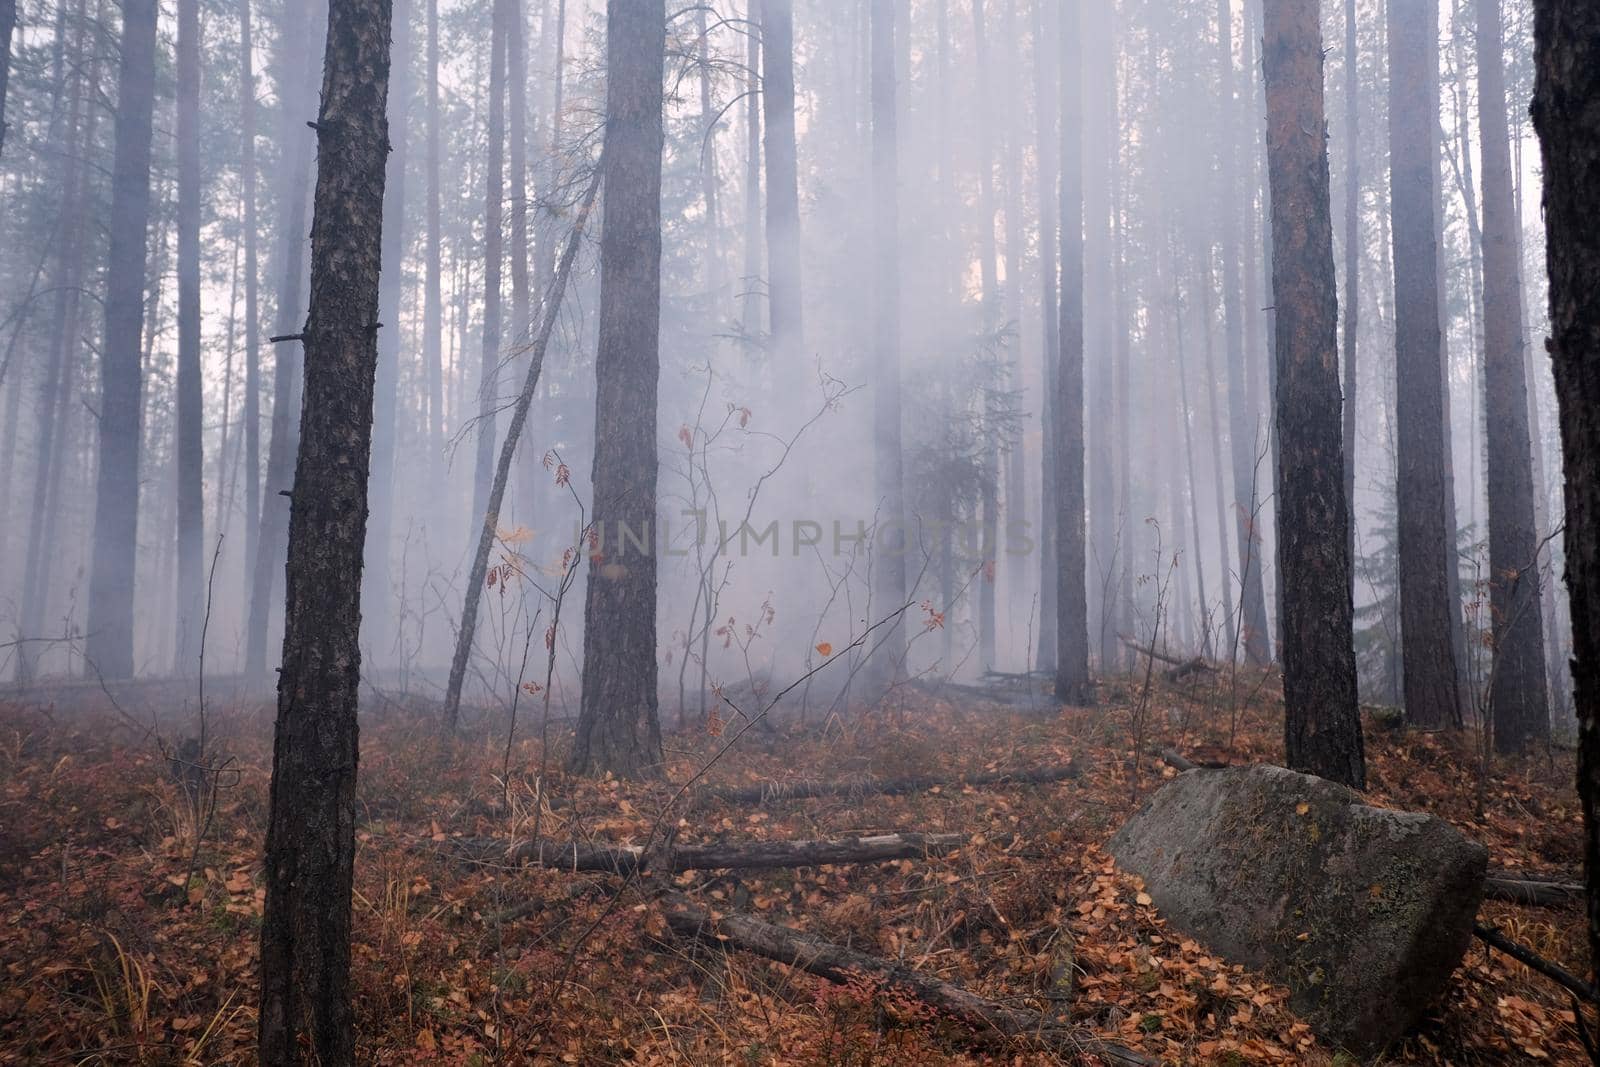 Burning forest in autumn with stone in the foreground by Demkat